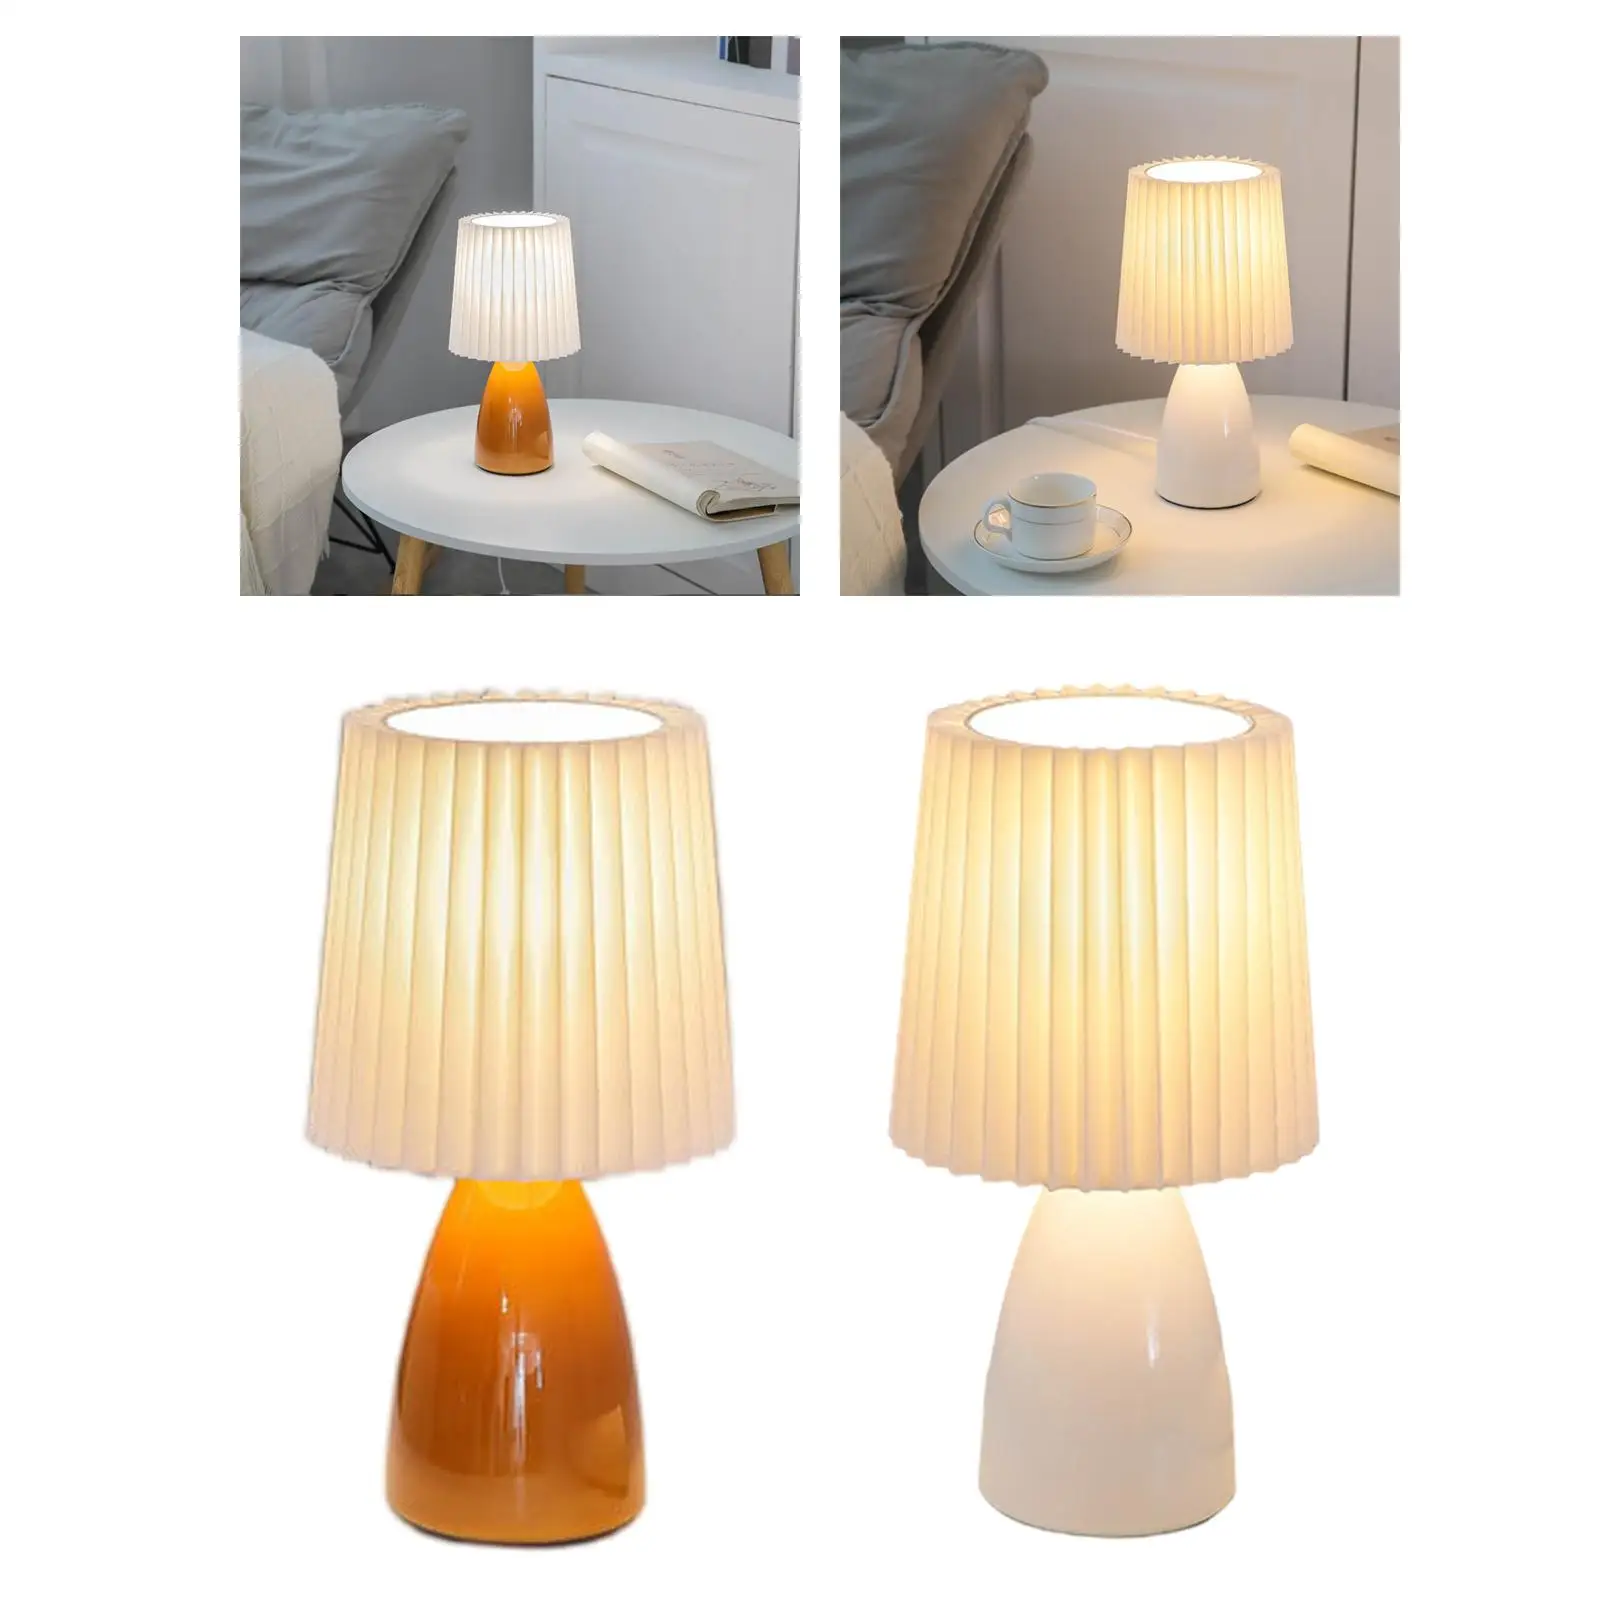 Glass LED Desk Lamp For Bedroom Korean Ins Style Striped Pleated Table Lamp Decor Cute Glass Translucent Bedside Lamp